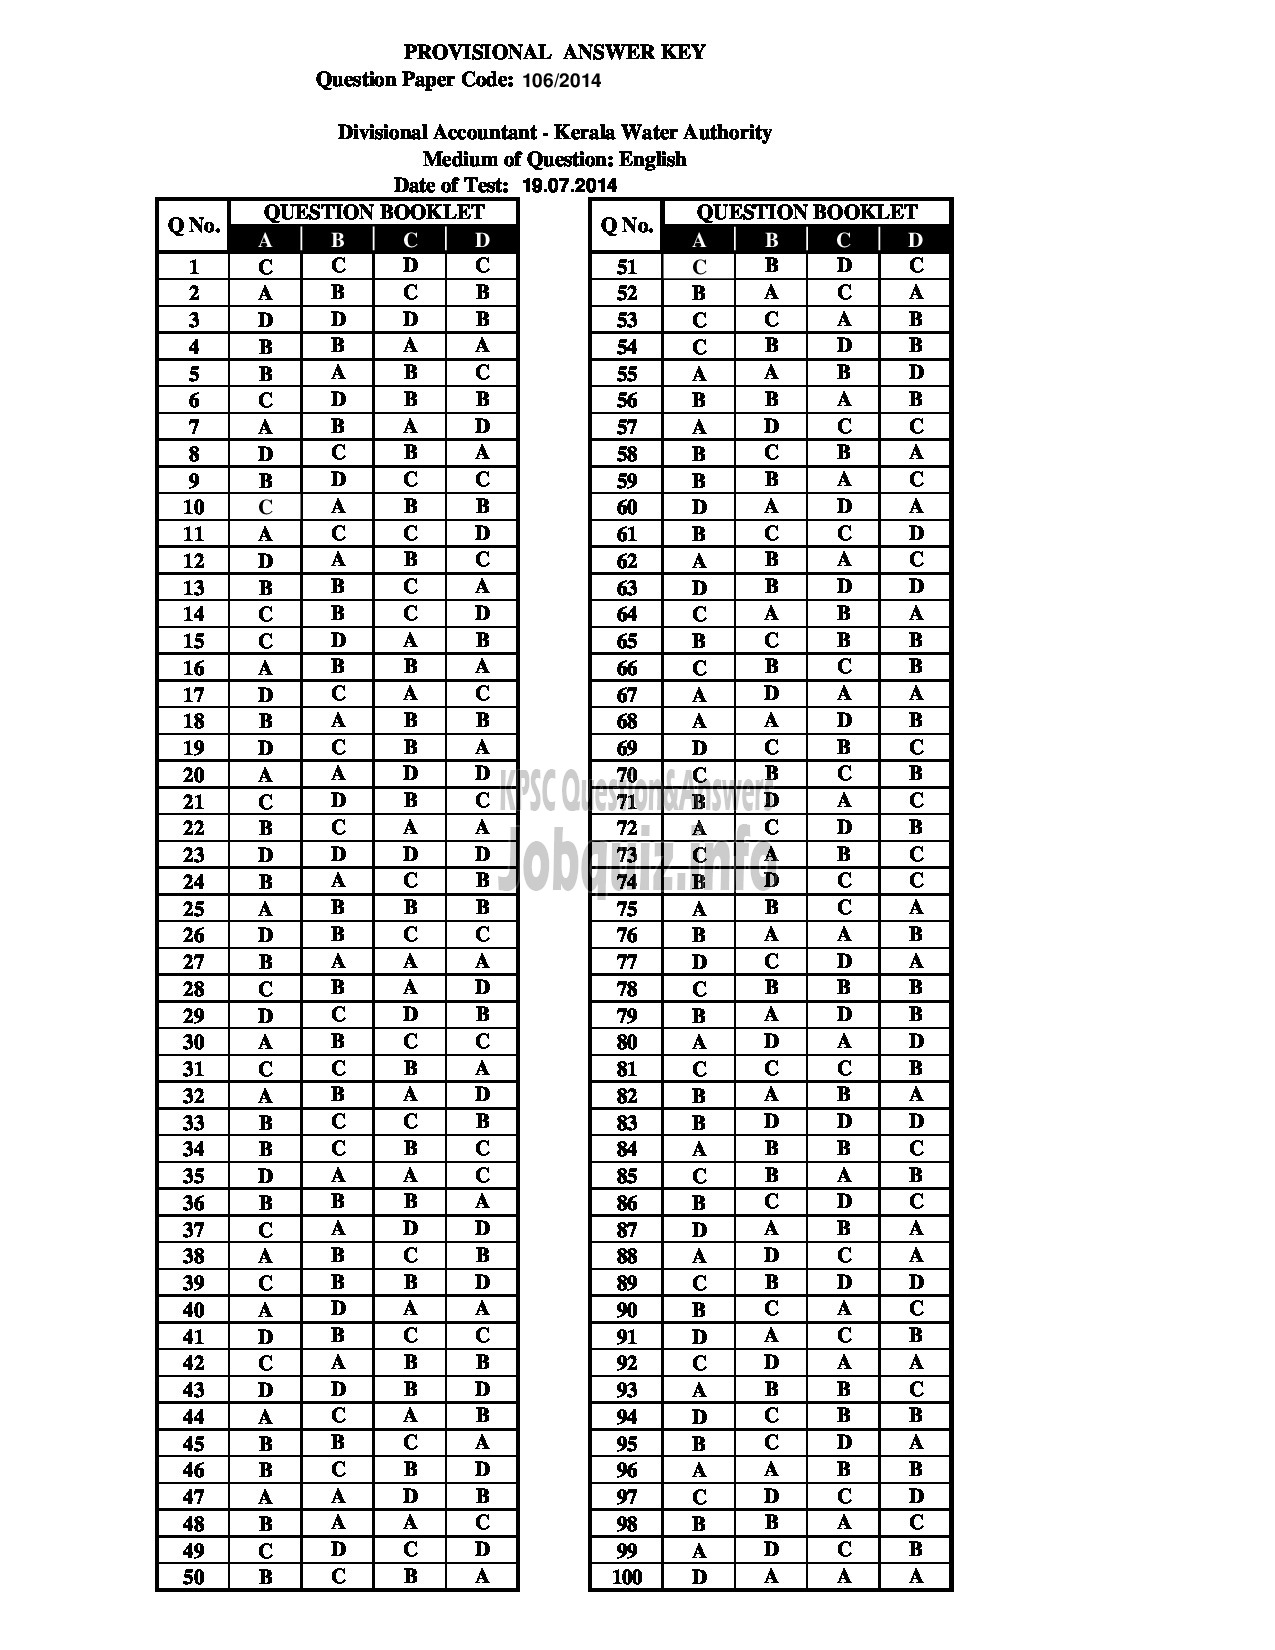 Kerala PSC Answer Key - DIVISIONAL ACCOUNTANT KERALA WATER AUTHORITY PRELIMINARY TEST